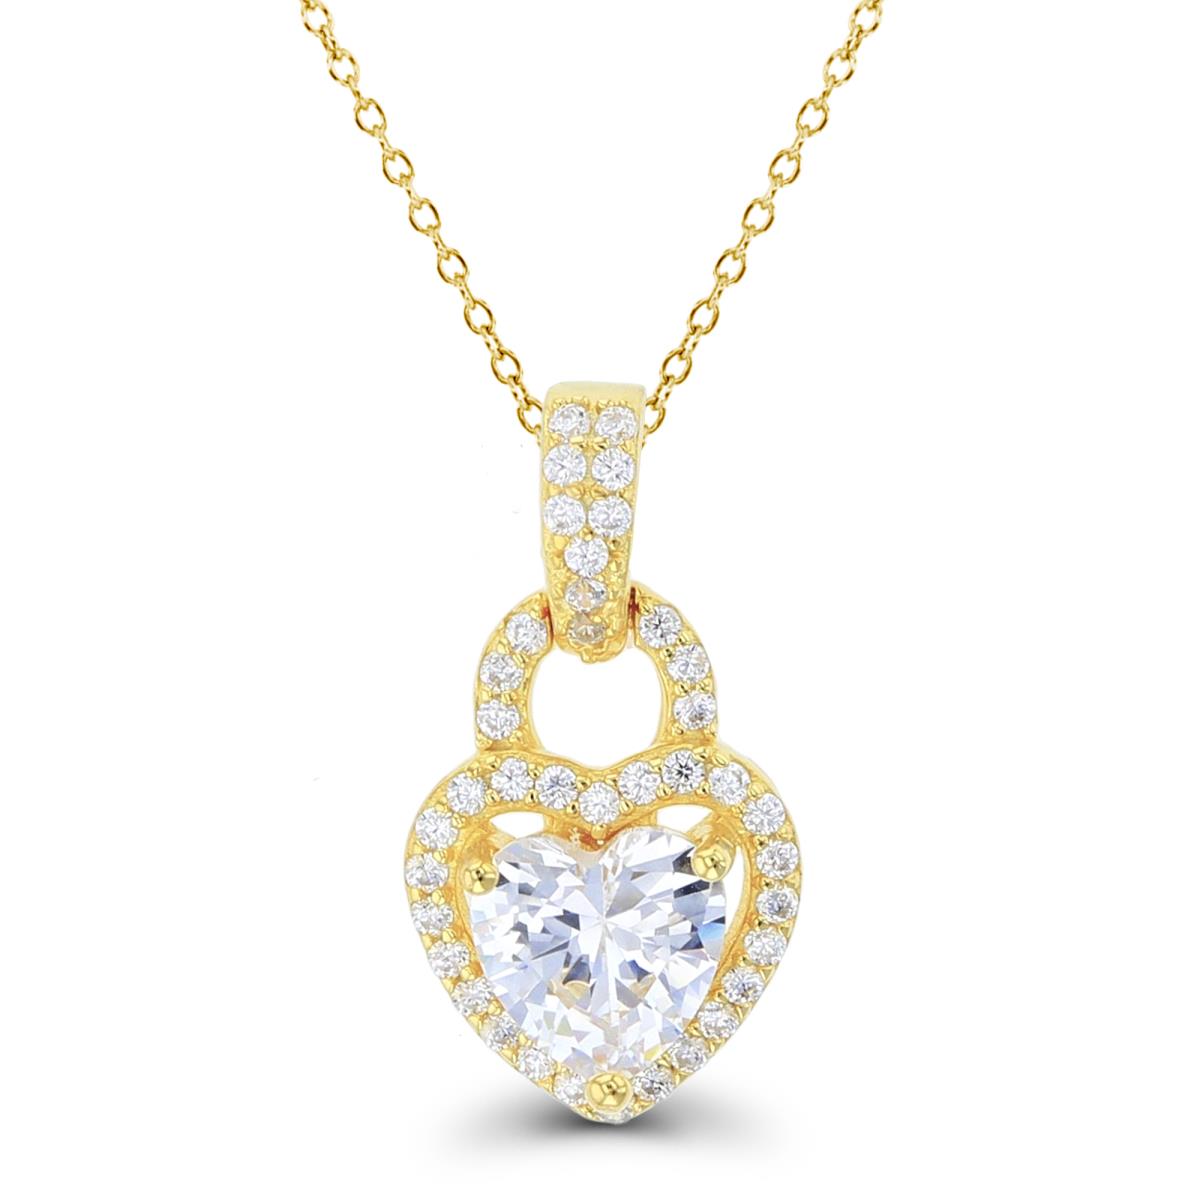 Sterling Silver+1Micron Yellow Gold 6mm HS White CZ Center & Rnd White CZ Halo Heart 18"Necklace